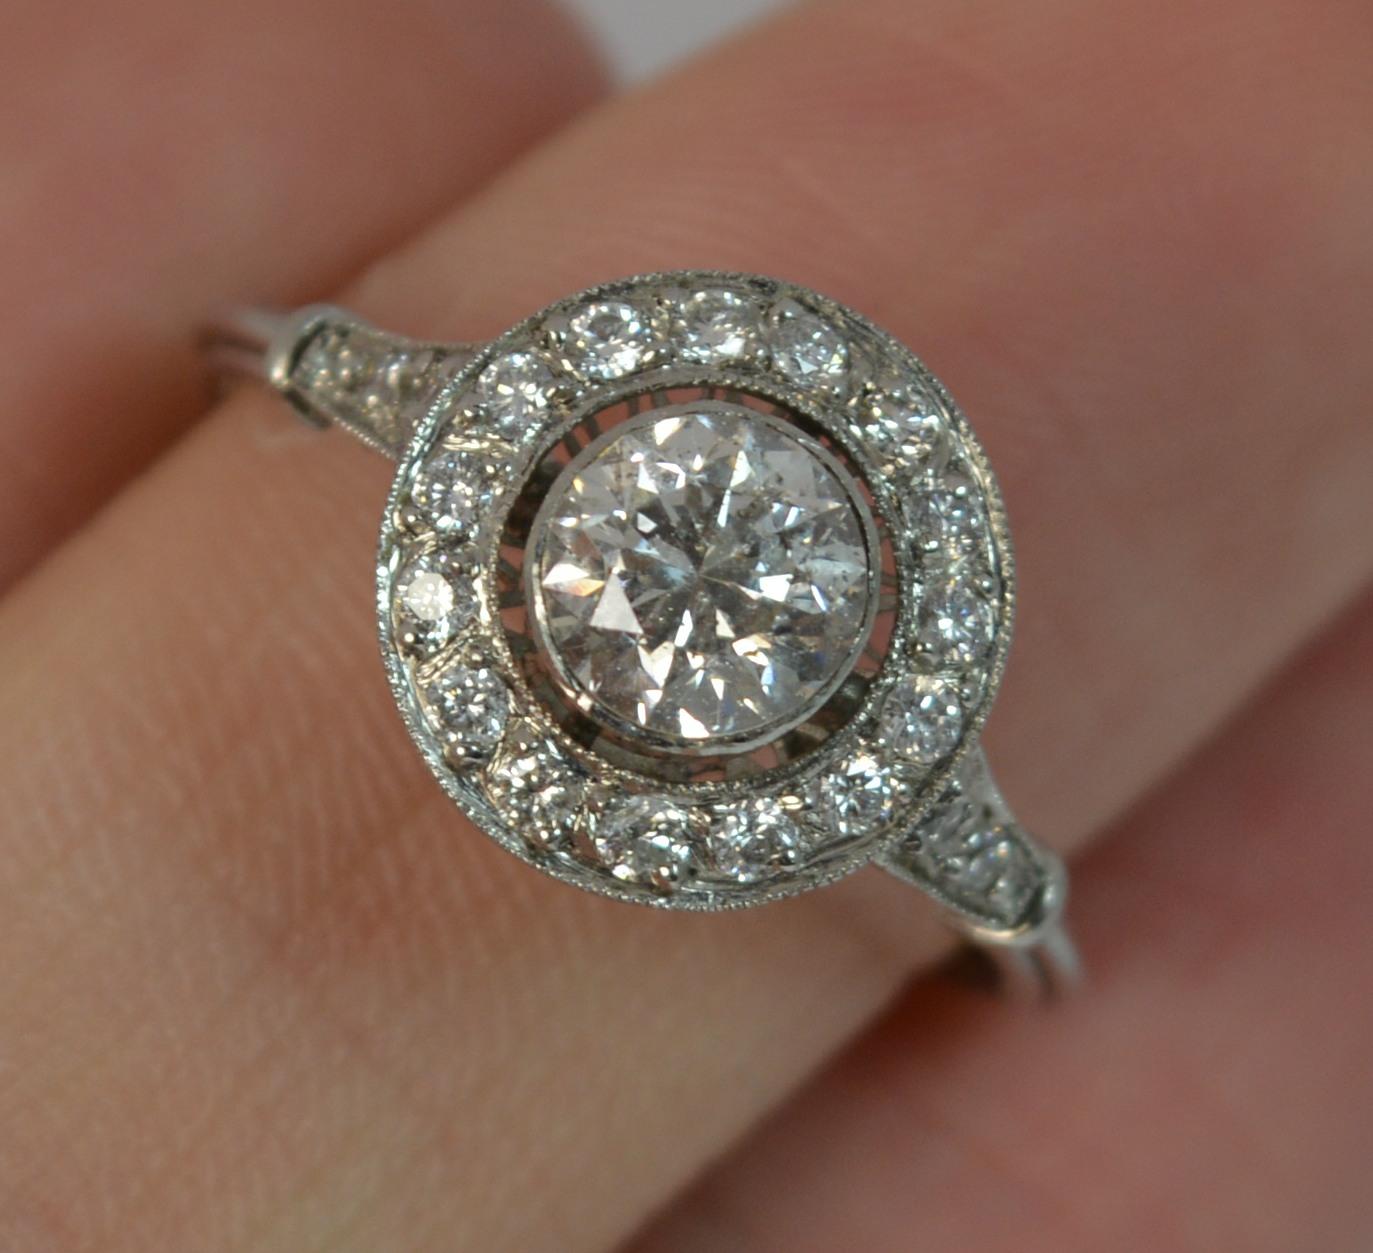 A Platinum and Diamond set ladies target or halo designed ring.

Platinum shank and collet setting.

Set with an old cut diamond to the centre, 5.9mm diameter, 0.90 carats approx. Surrounding are smaller natural diamonds and further diamonds to the